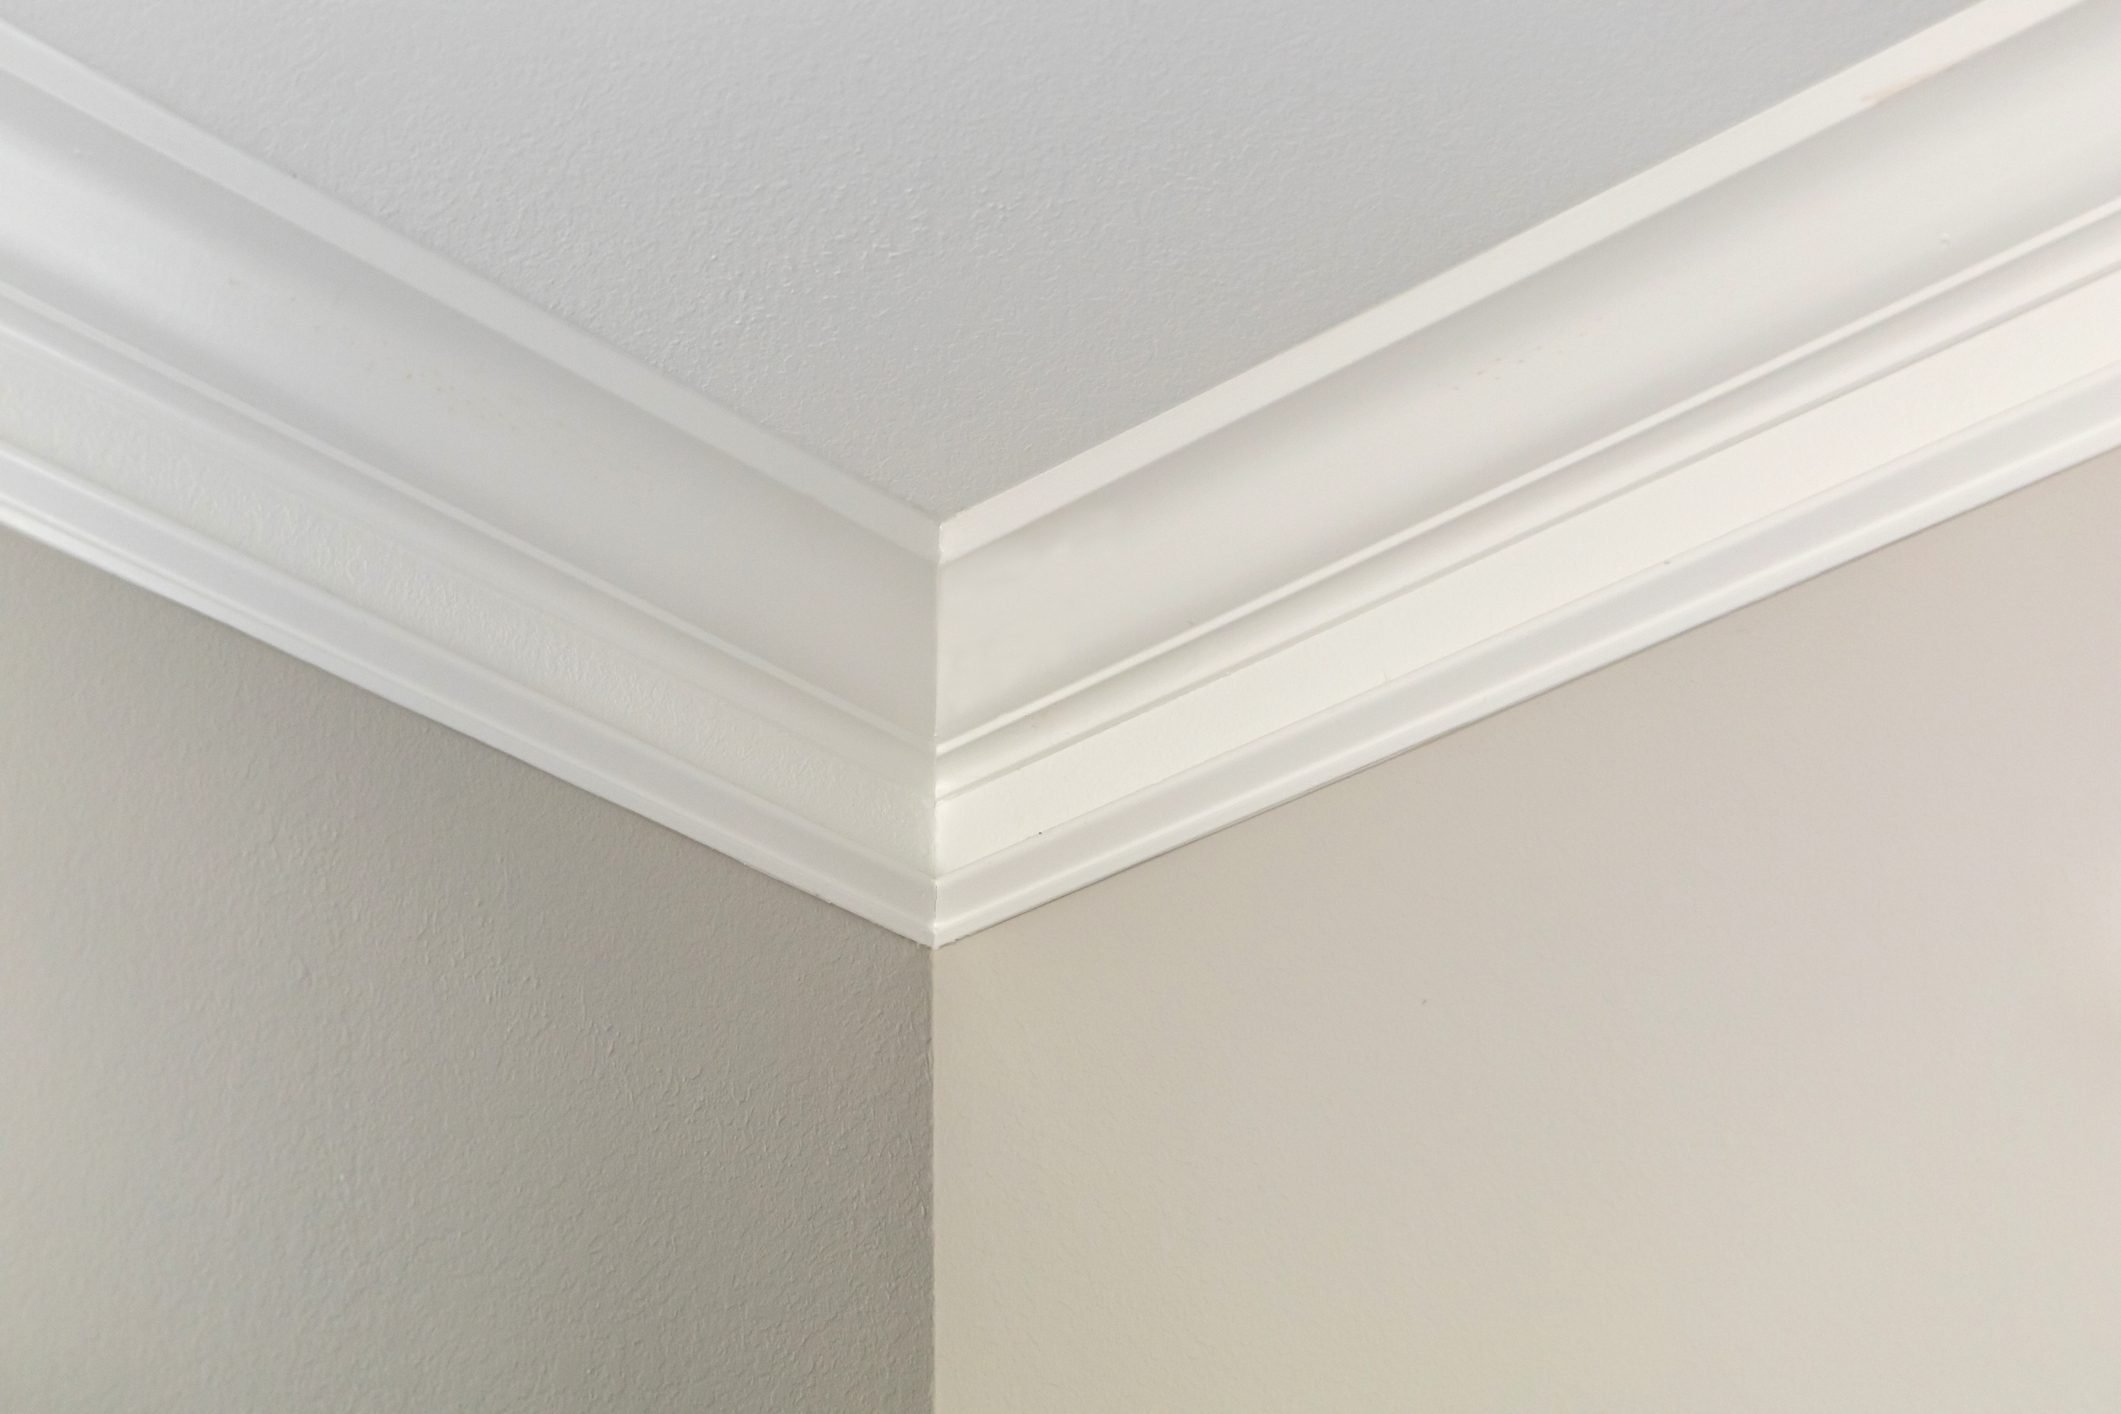 What to Know About Interior Trim and Molding